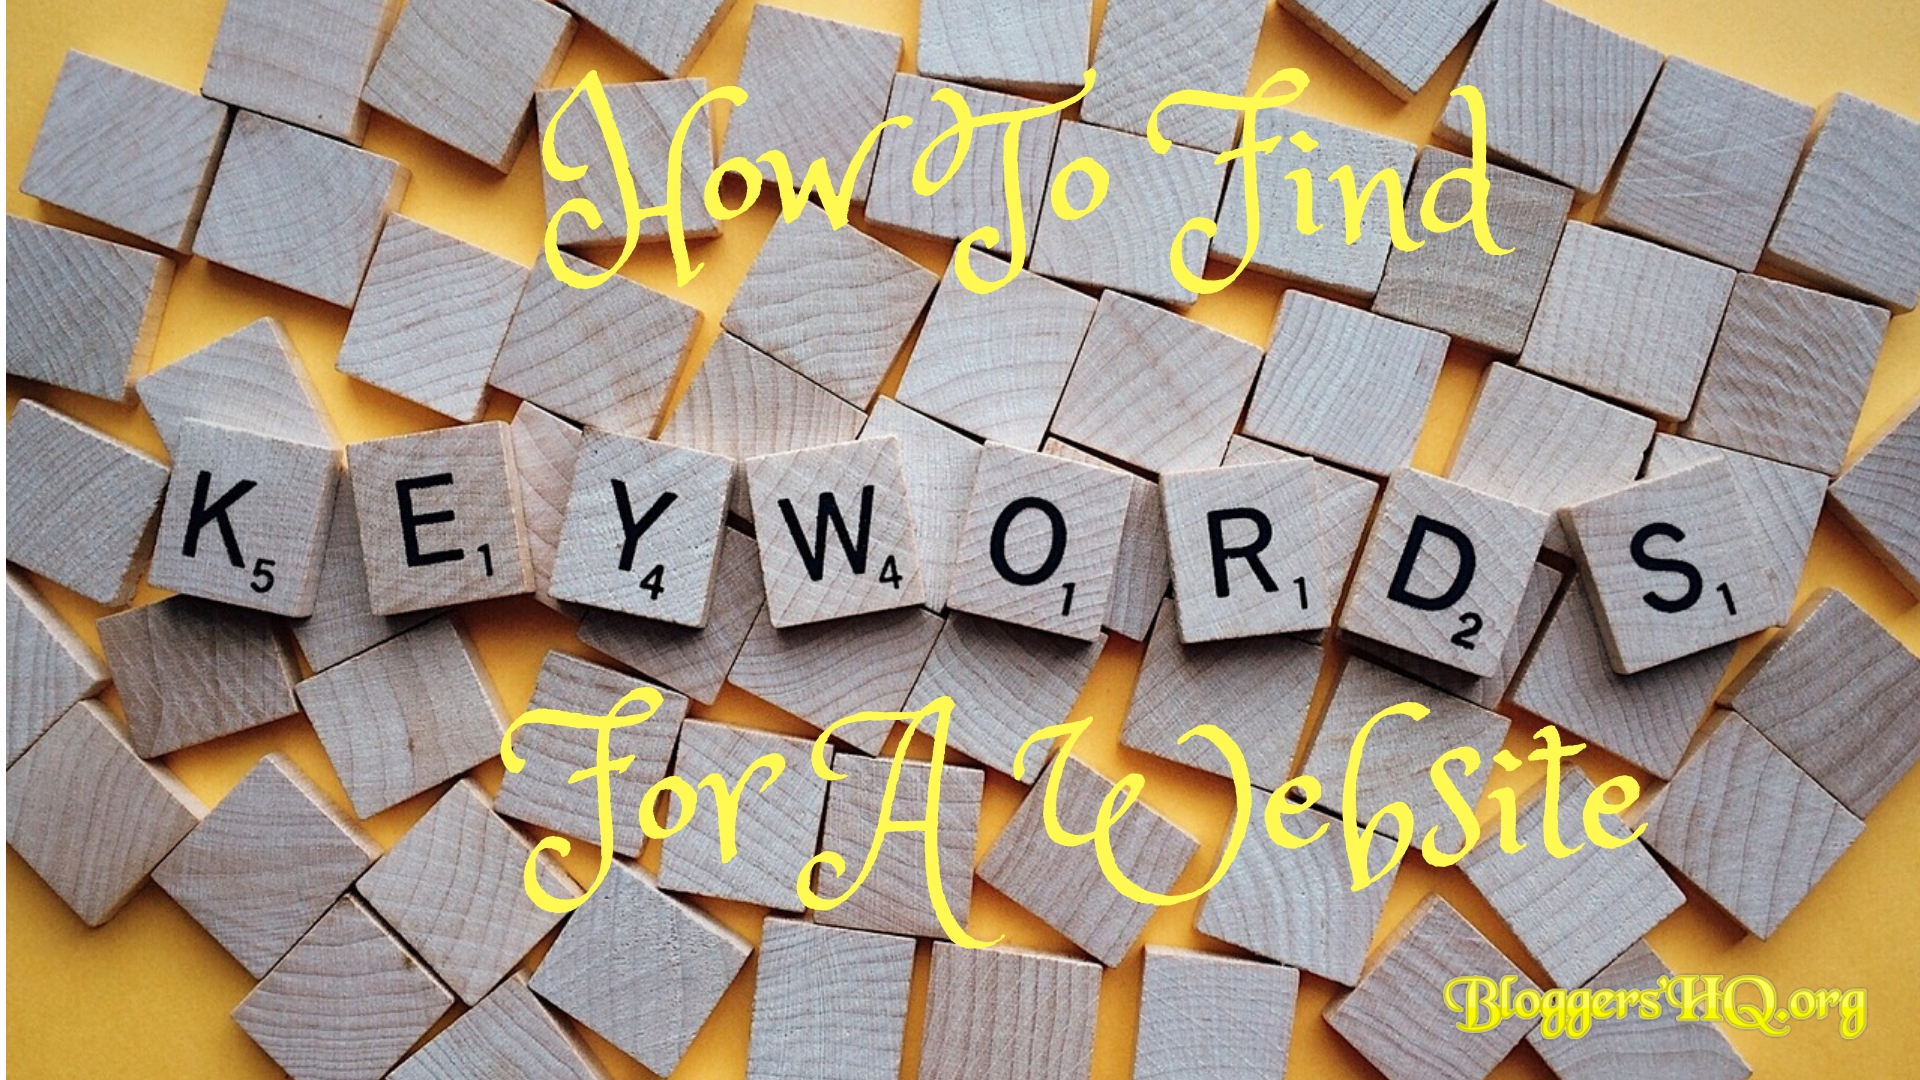 How To Find Keywords For A Website [UPDATED 2019] – The Ultimate Guide For Finding Awesome Keywords!